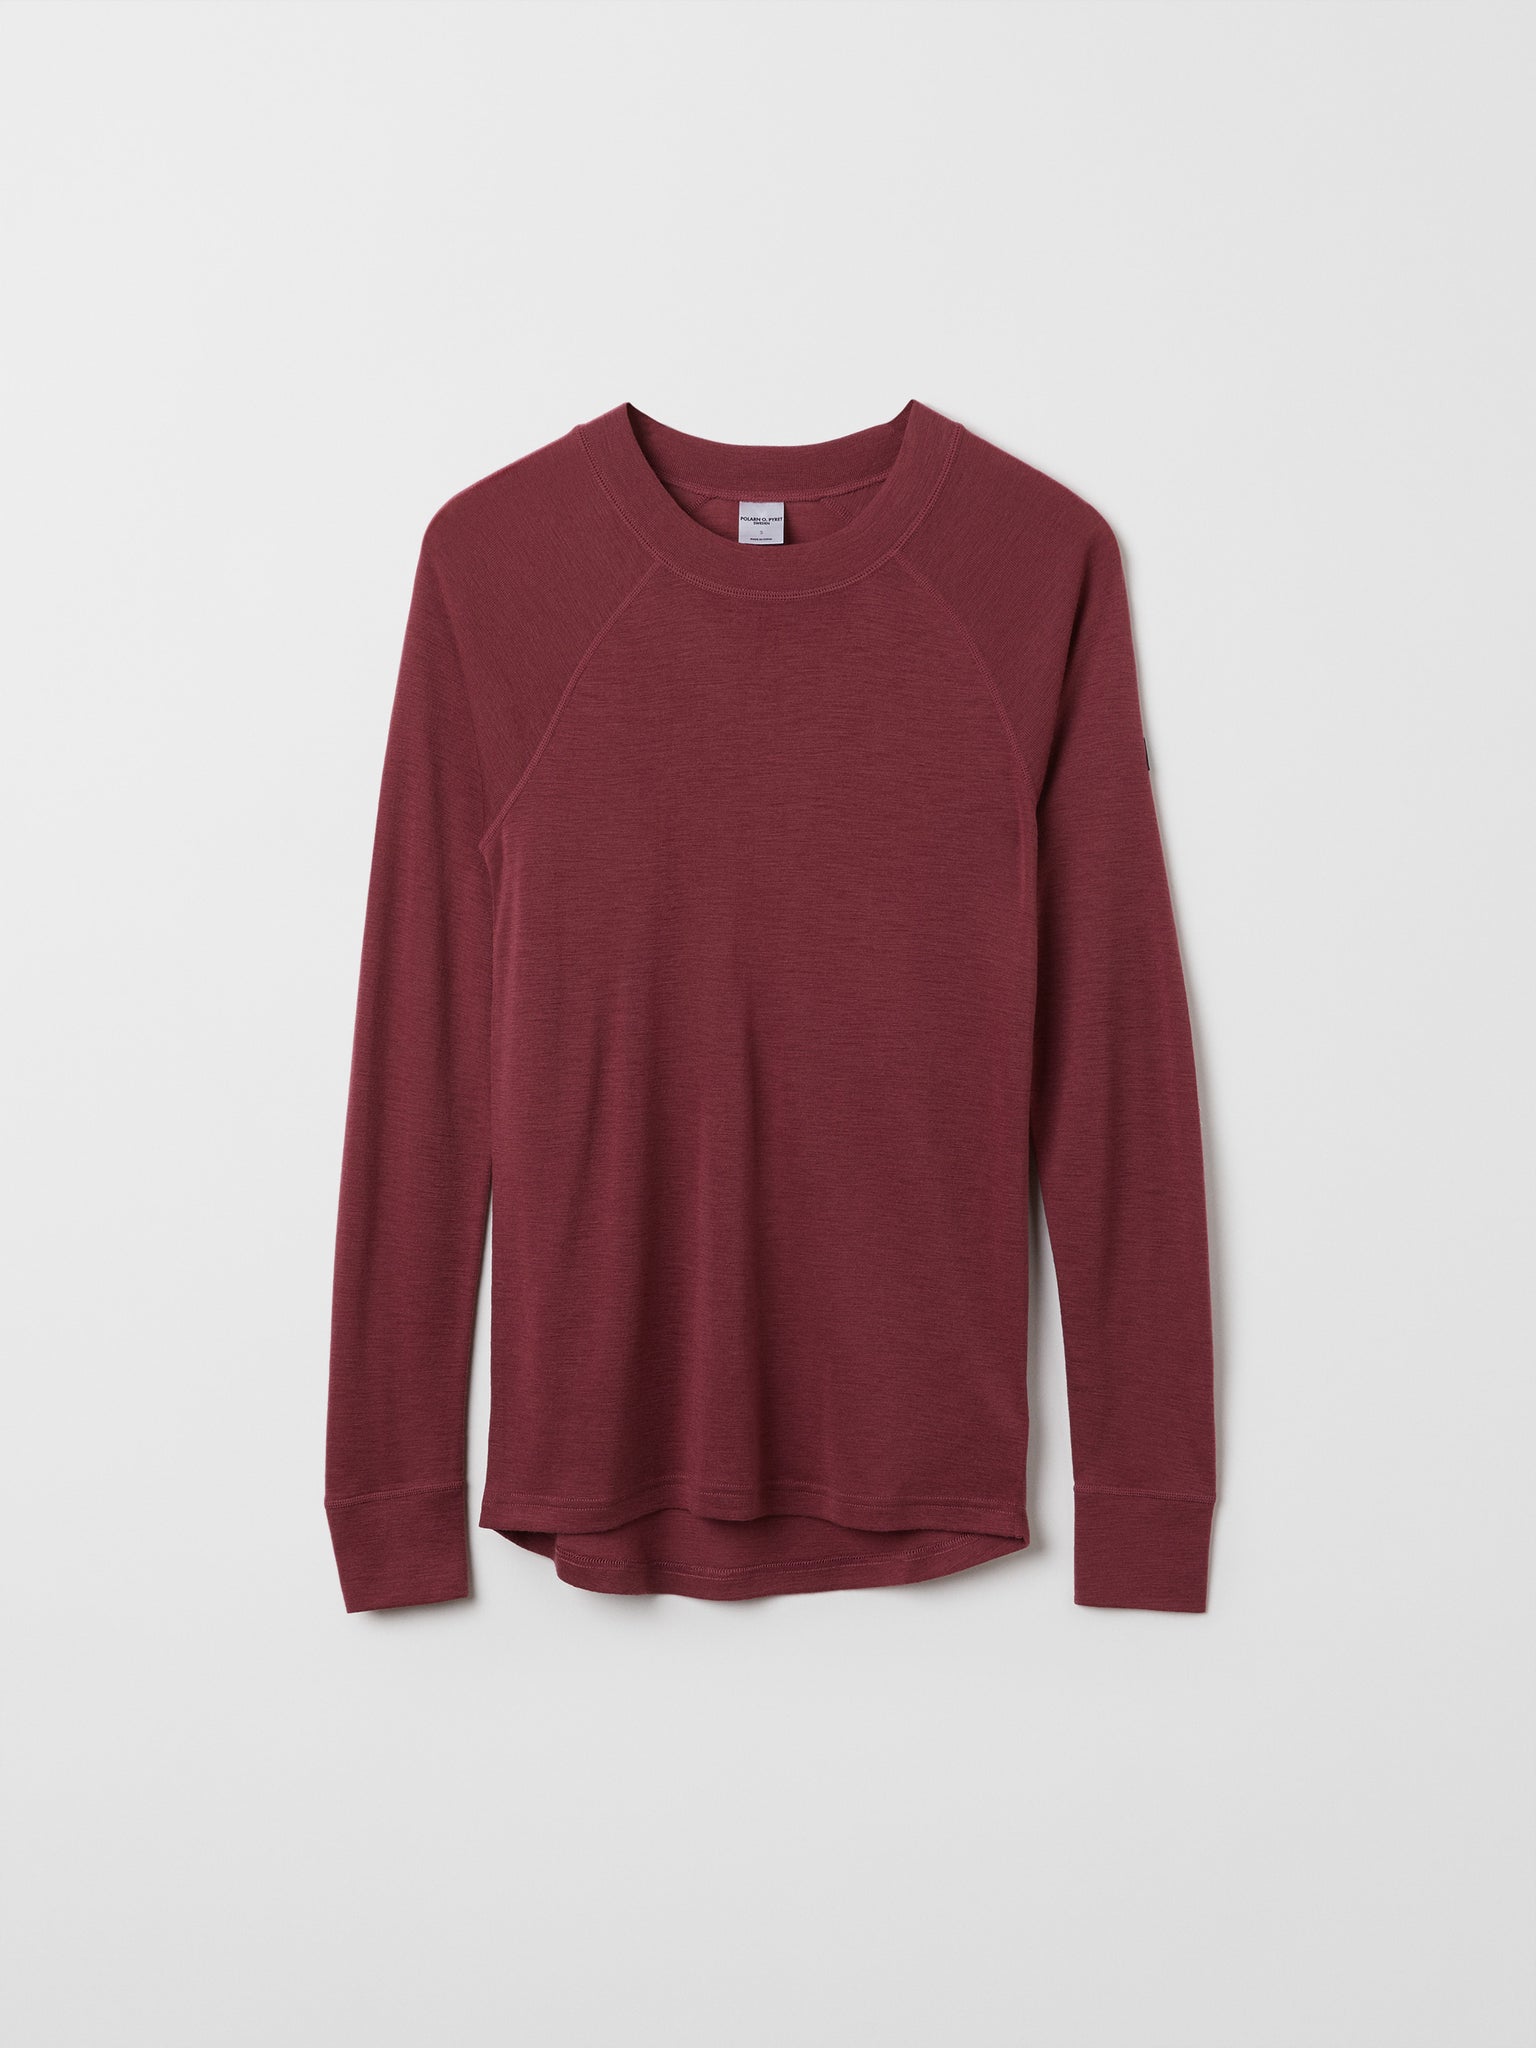 Red Adult Merino Wool Thermal Top from the Polarn O. Pyret outerwear collection. Kids outerwear made from sustainably source materials